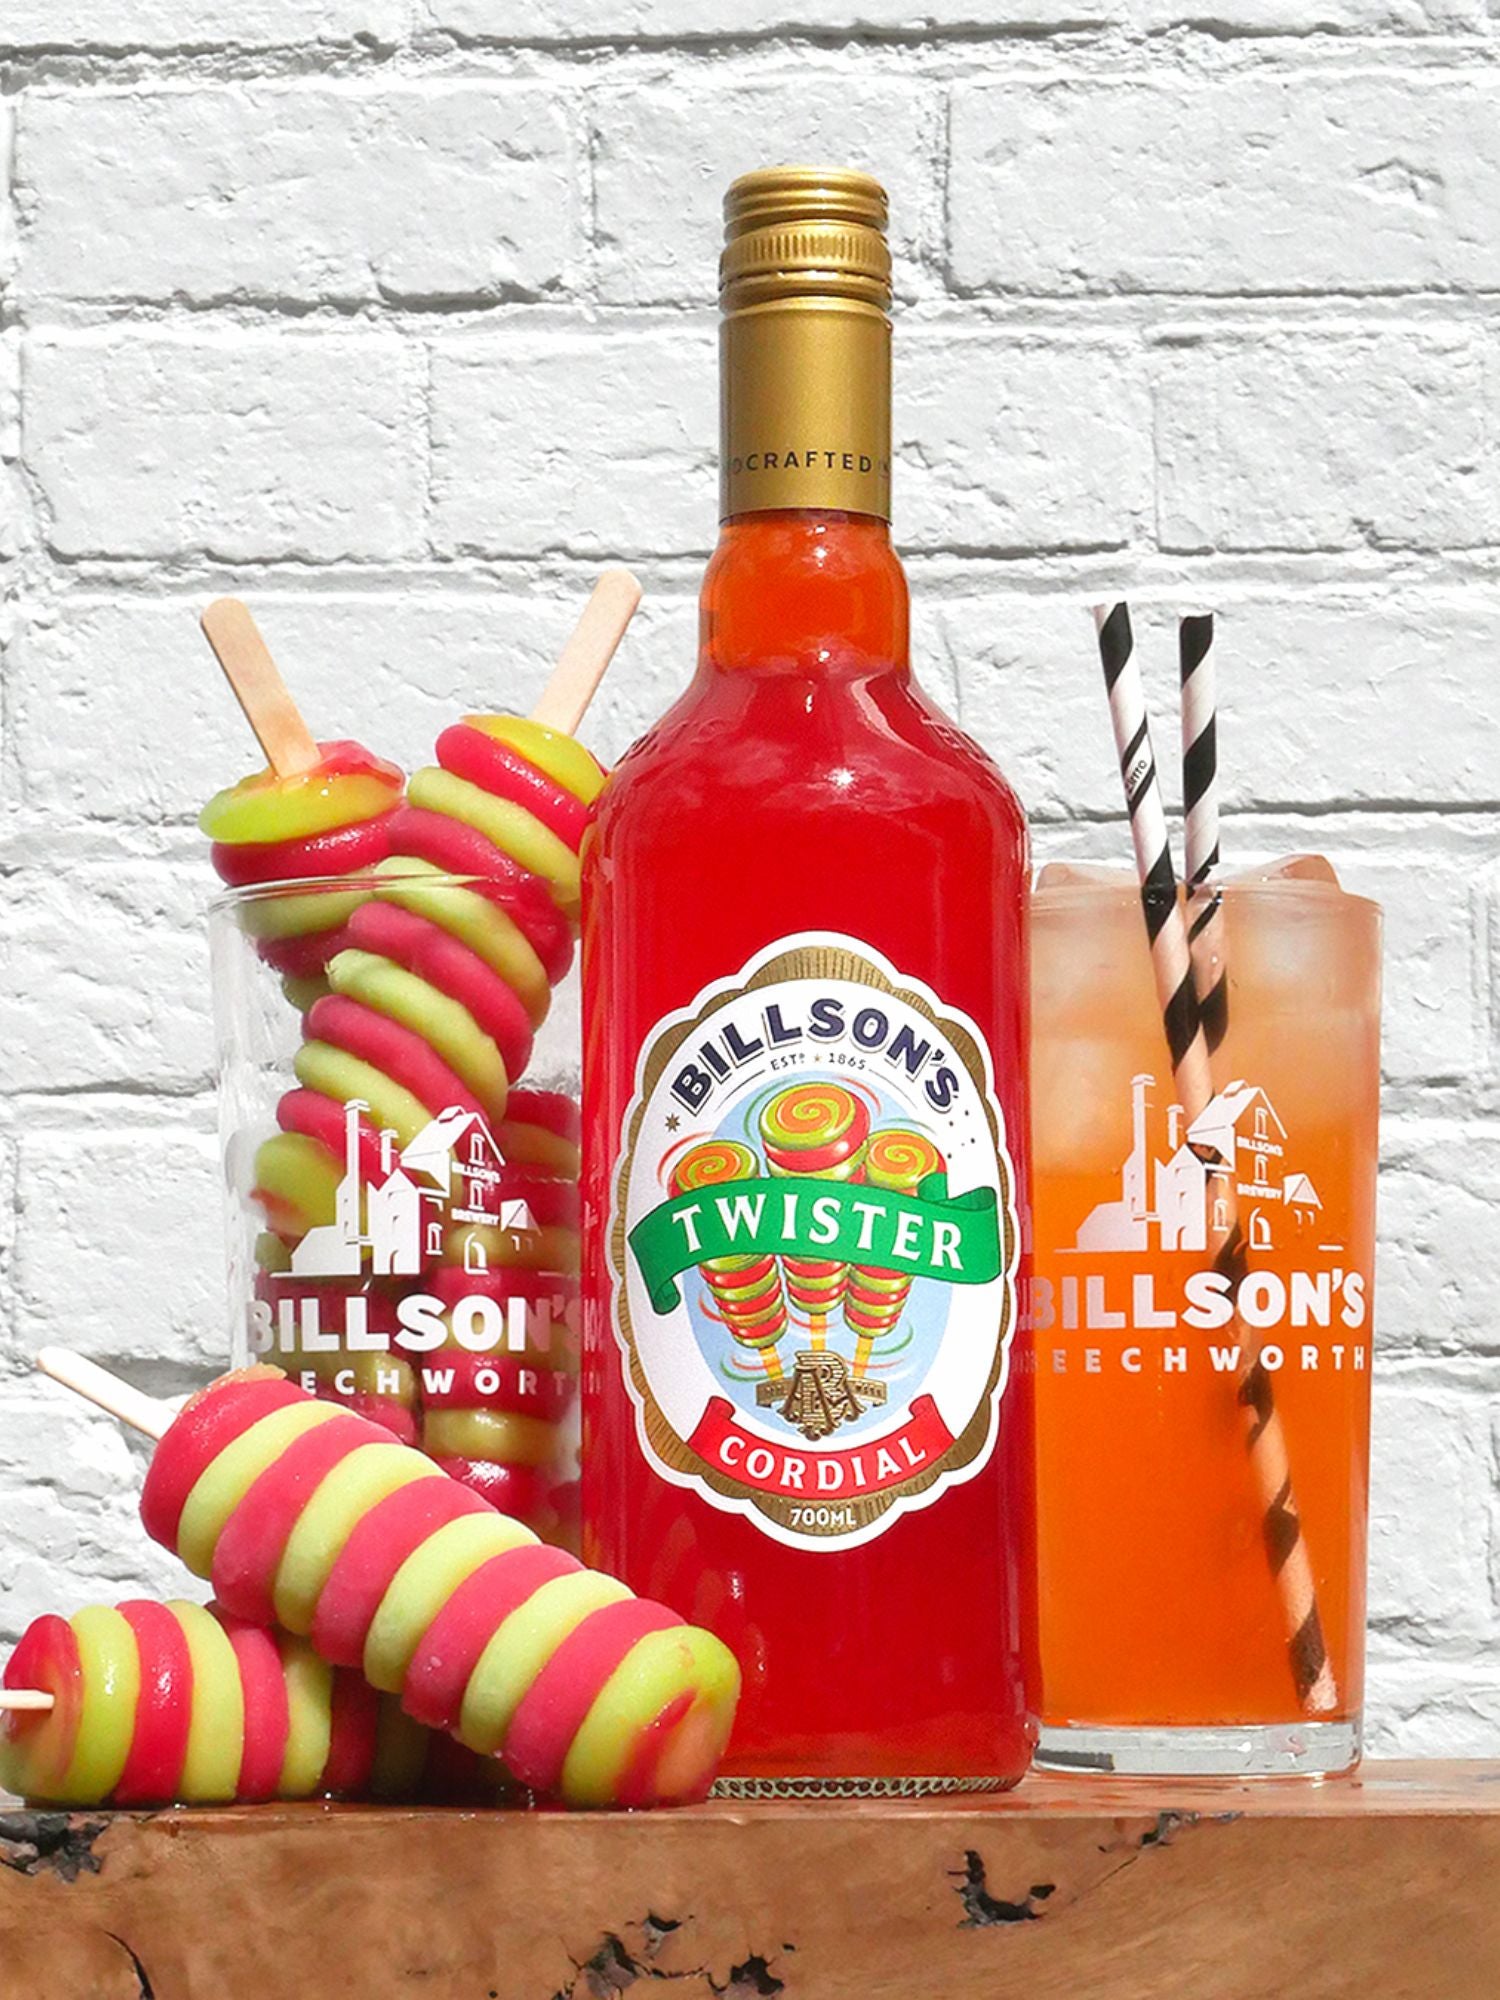 Twister Cordial